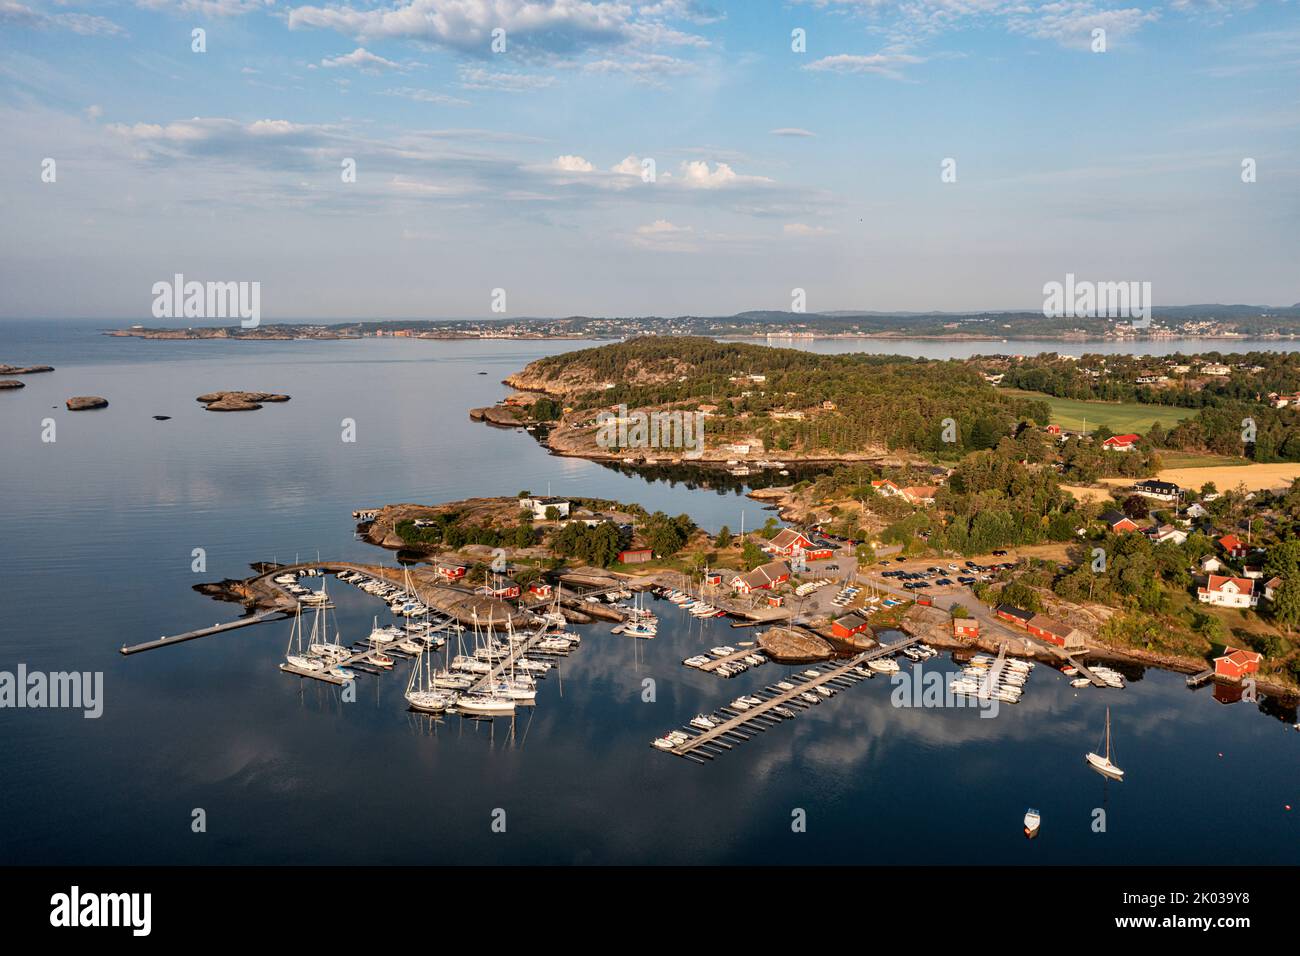 Norway, Vestfold og Telemark, Larvik, fjord, island, pleasure boats, jetties, Larvikfjord, houses, forest, rocky shore, Malmoya (island), Stavern (background), overview, aerial view Stock Photo